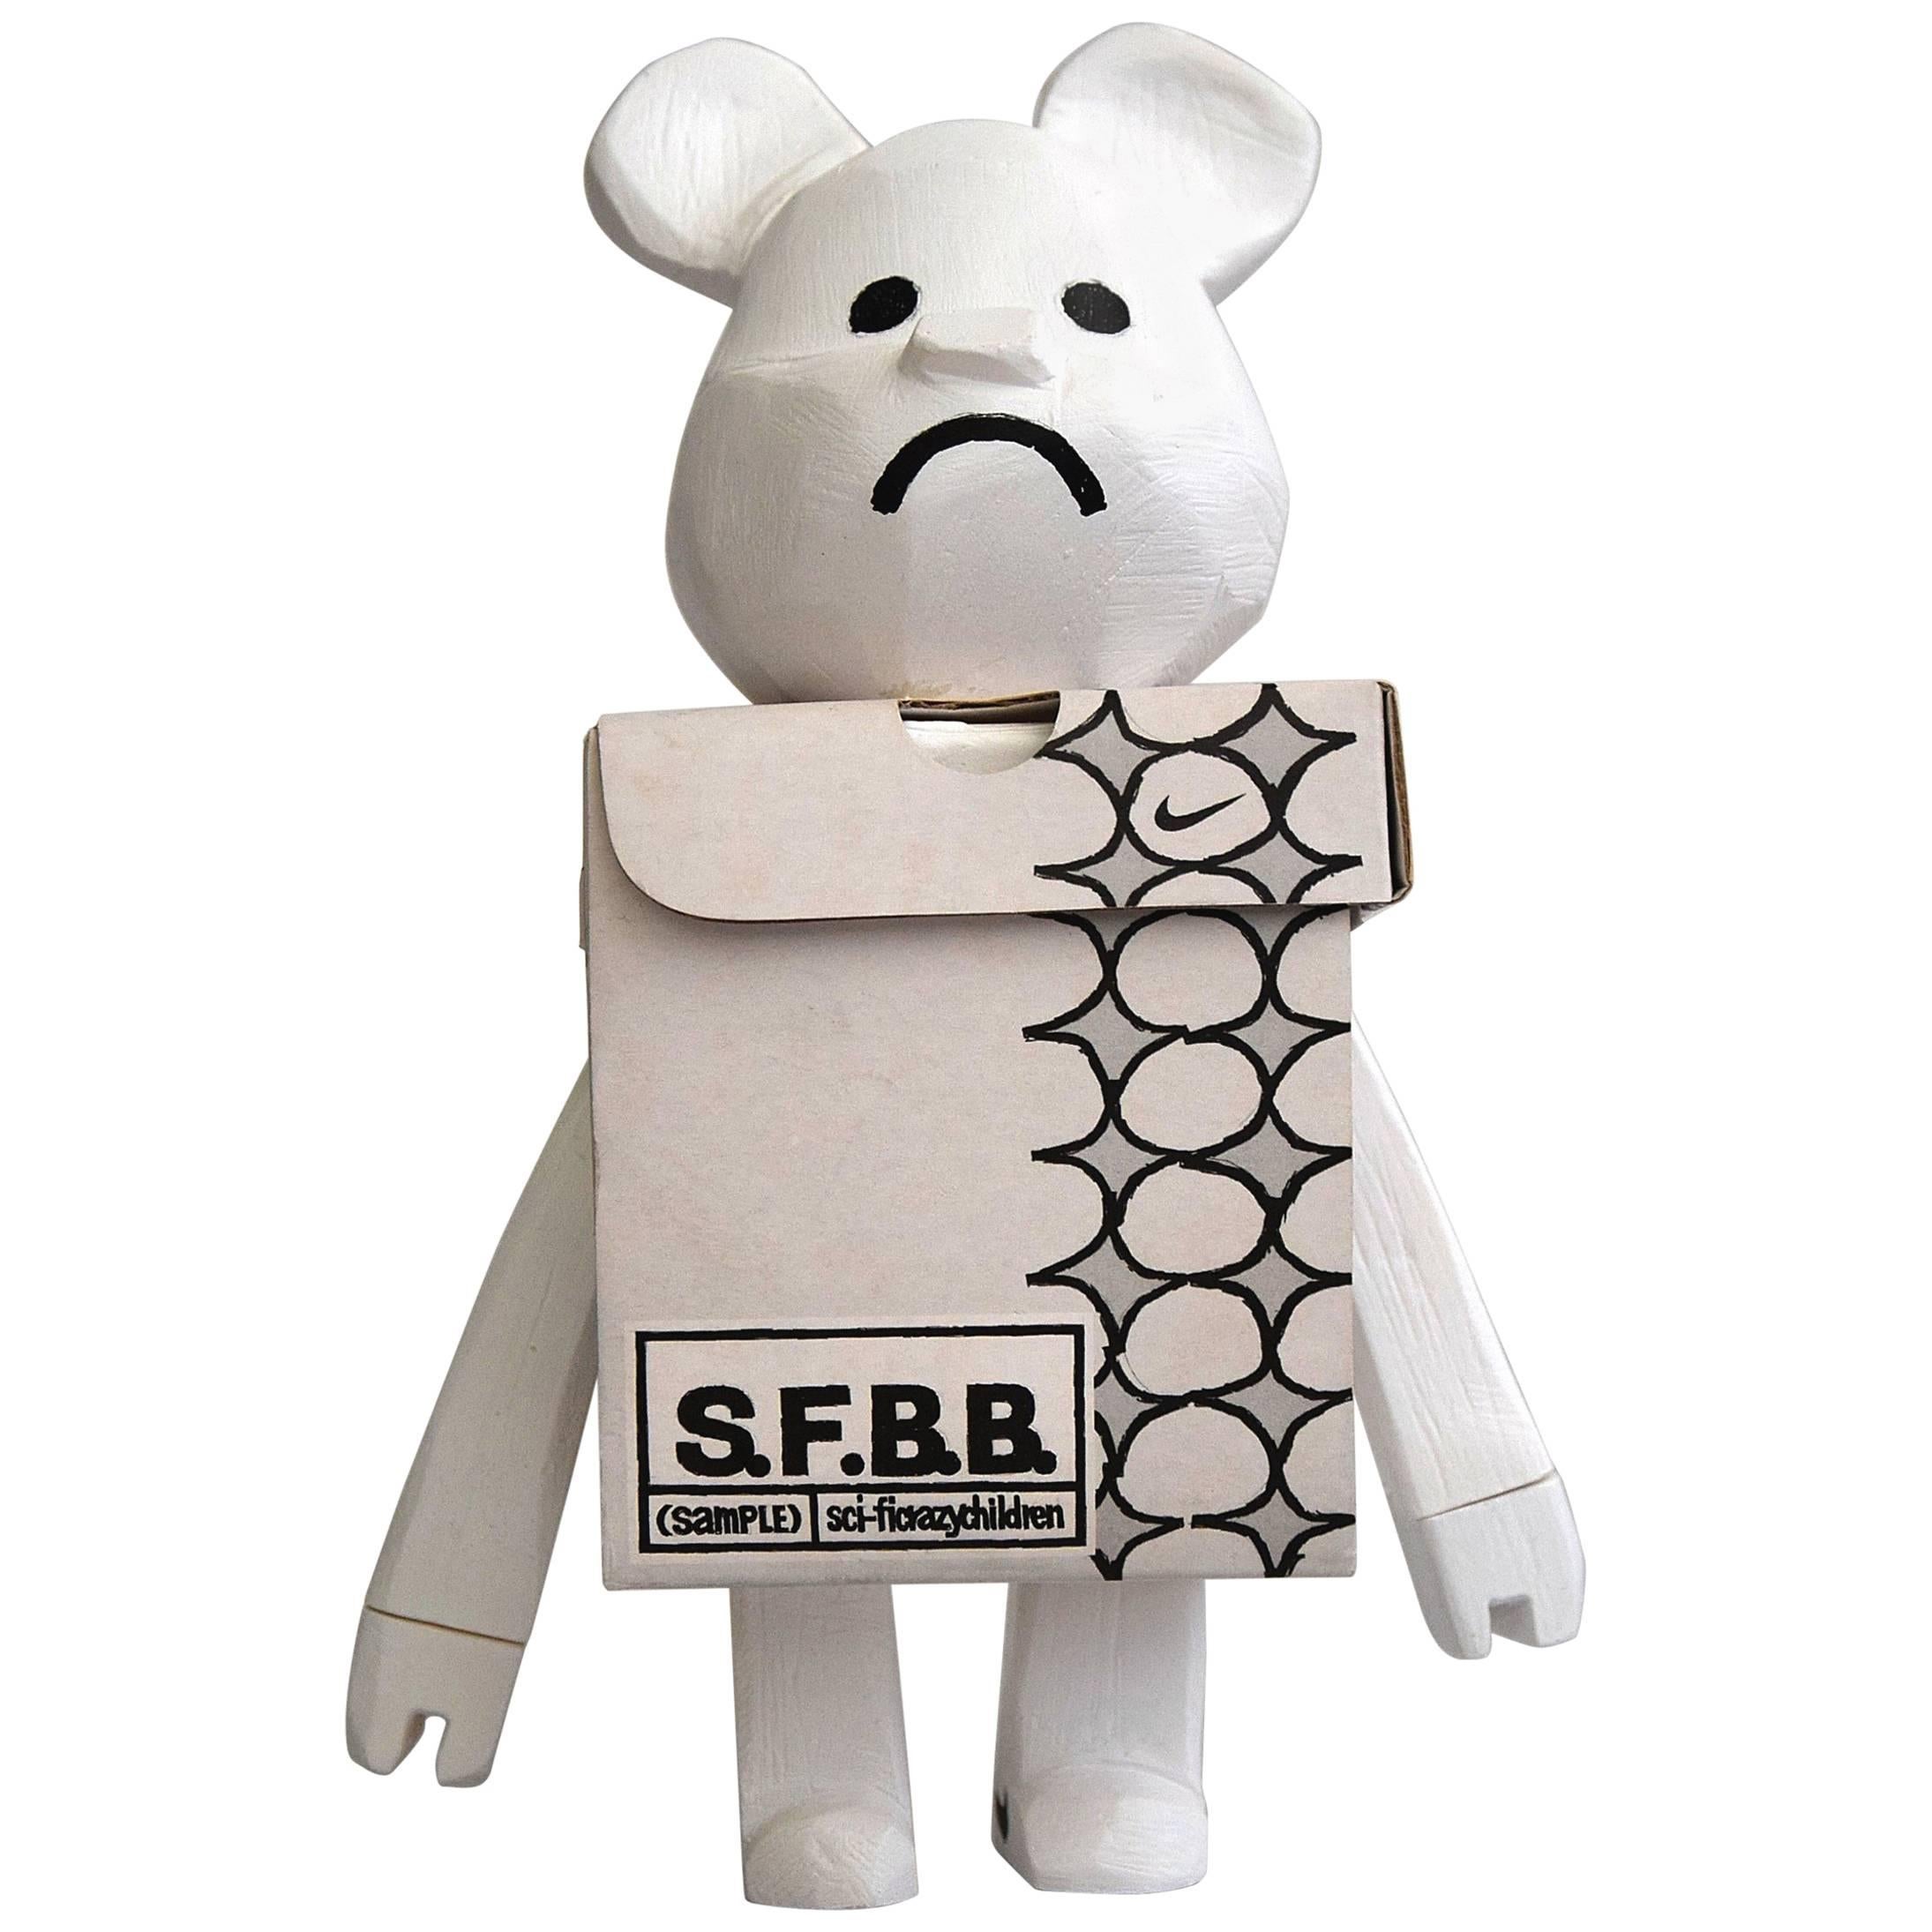 Designer Toy S.F.B.B. 'Sample' by Michael Lau, 2005 For Sale